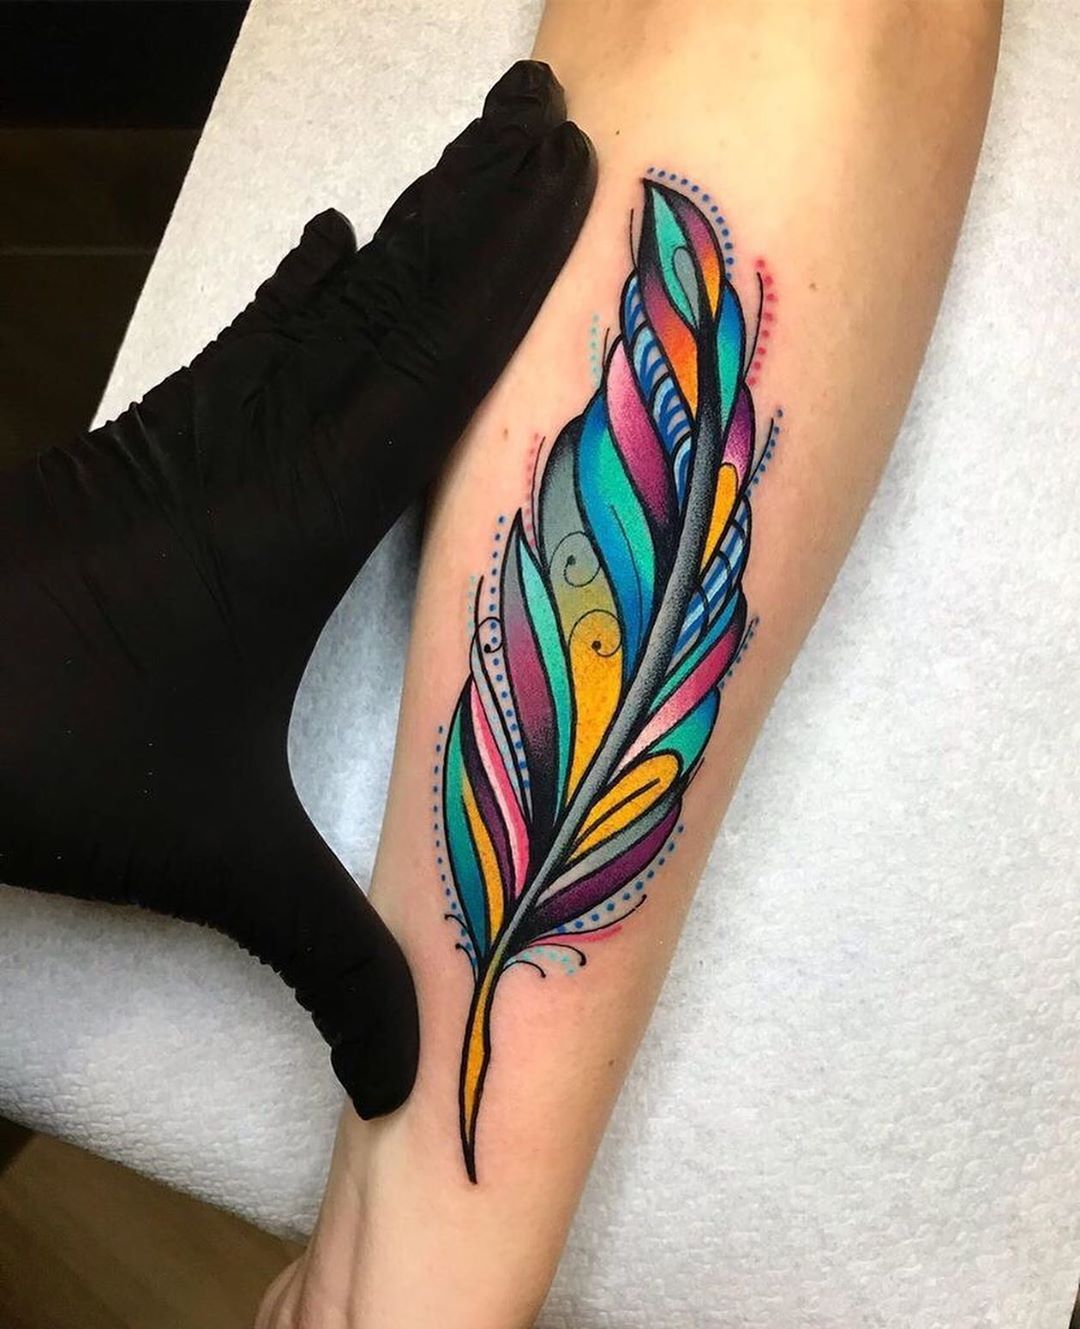 101 Amazing Feather Tattoo Designs You Need To See!